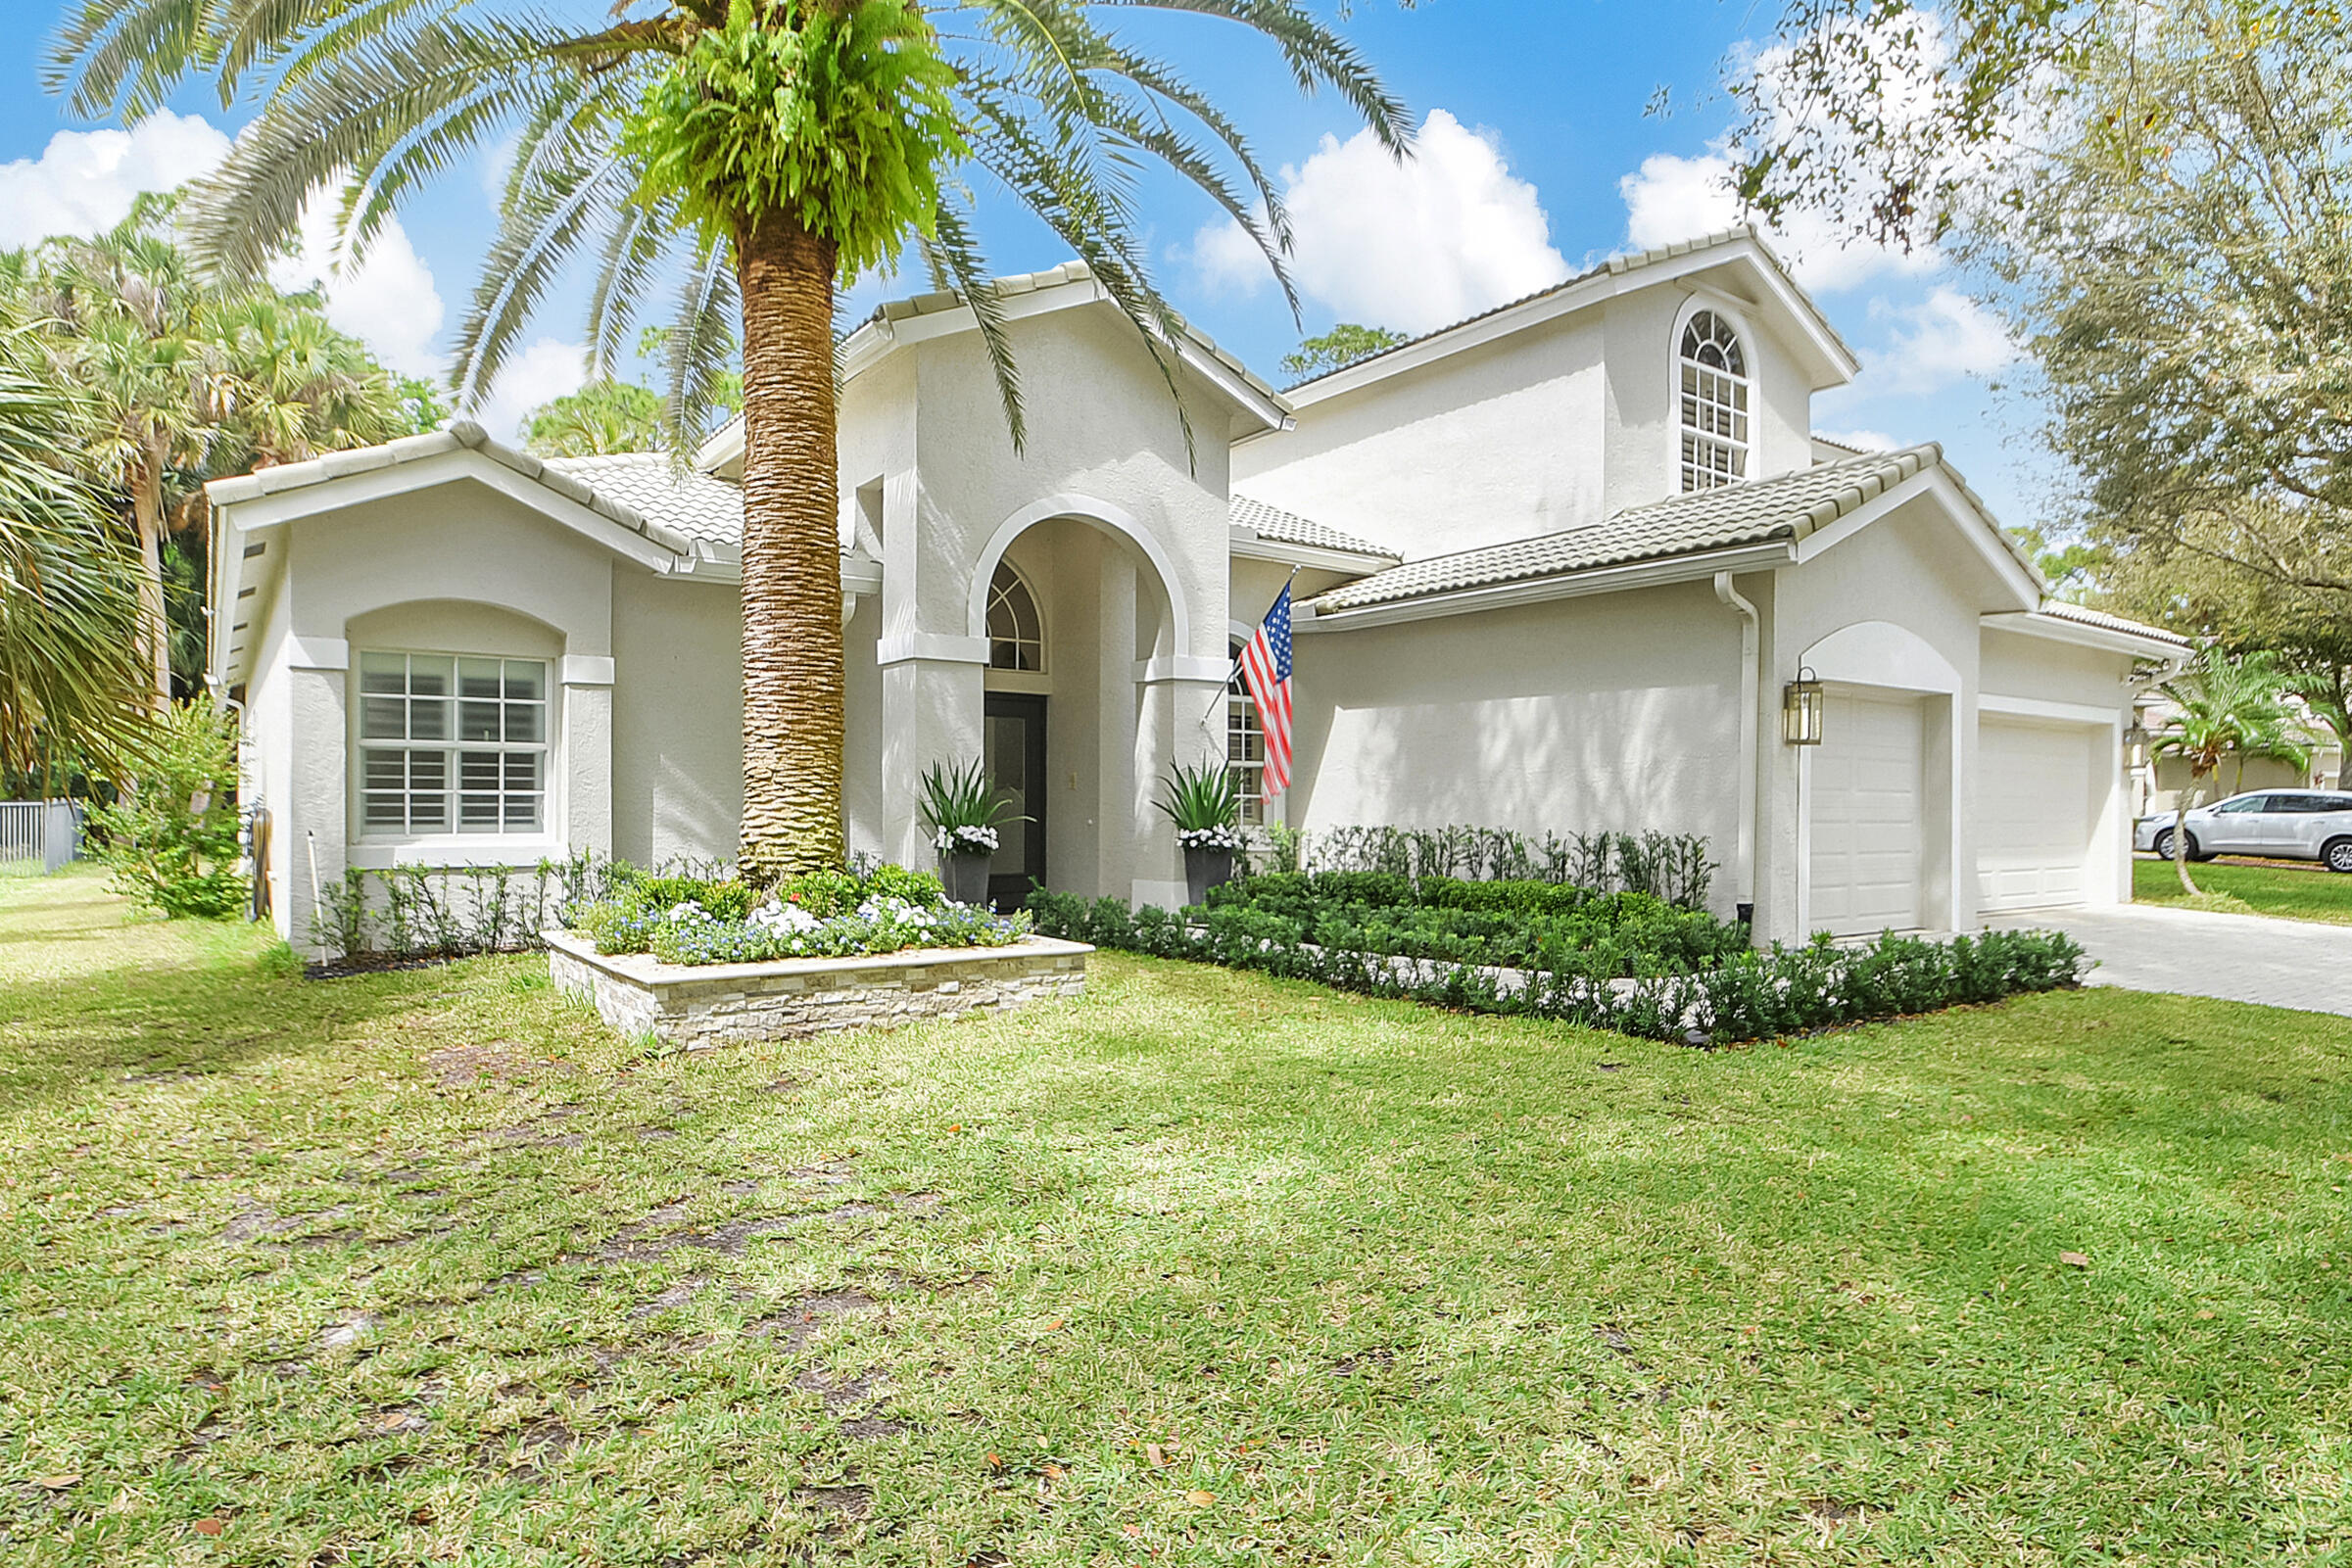 15562 Whispering Willow Drive, Wellington, Palm Beach County, Florida - 5 Bedrooms  
3 Bathrooms - 